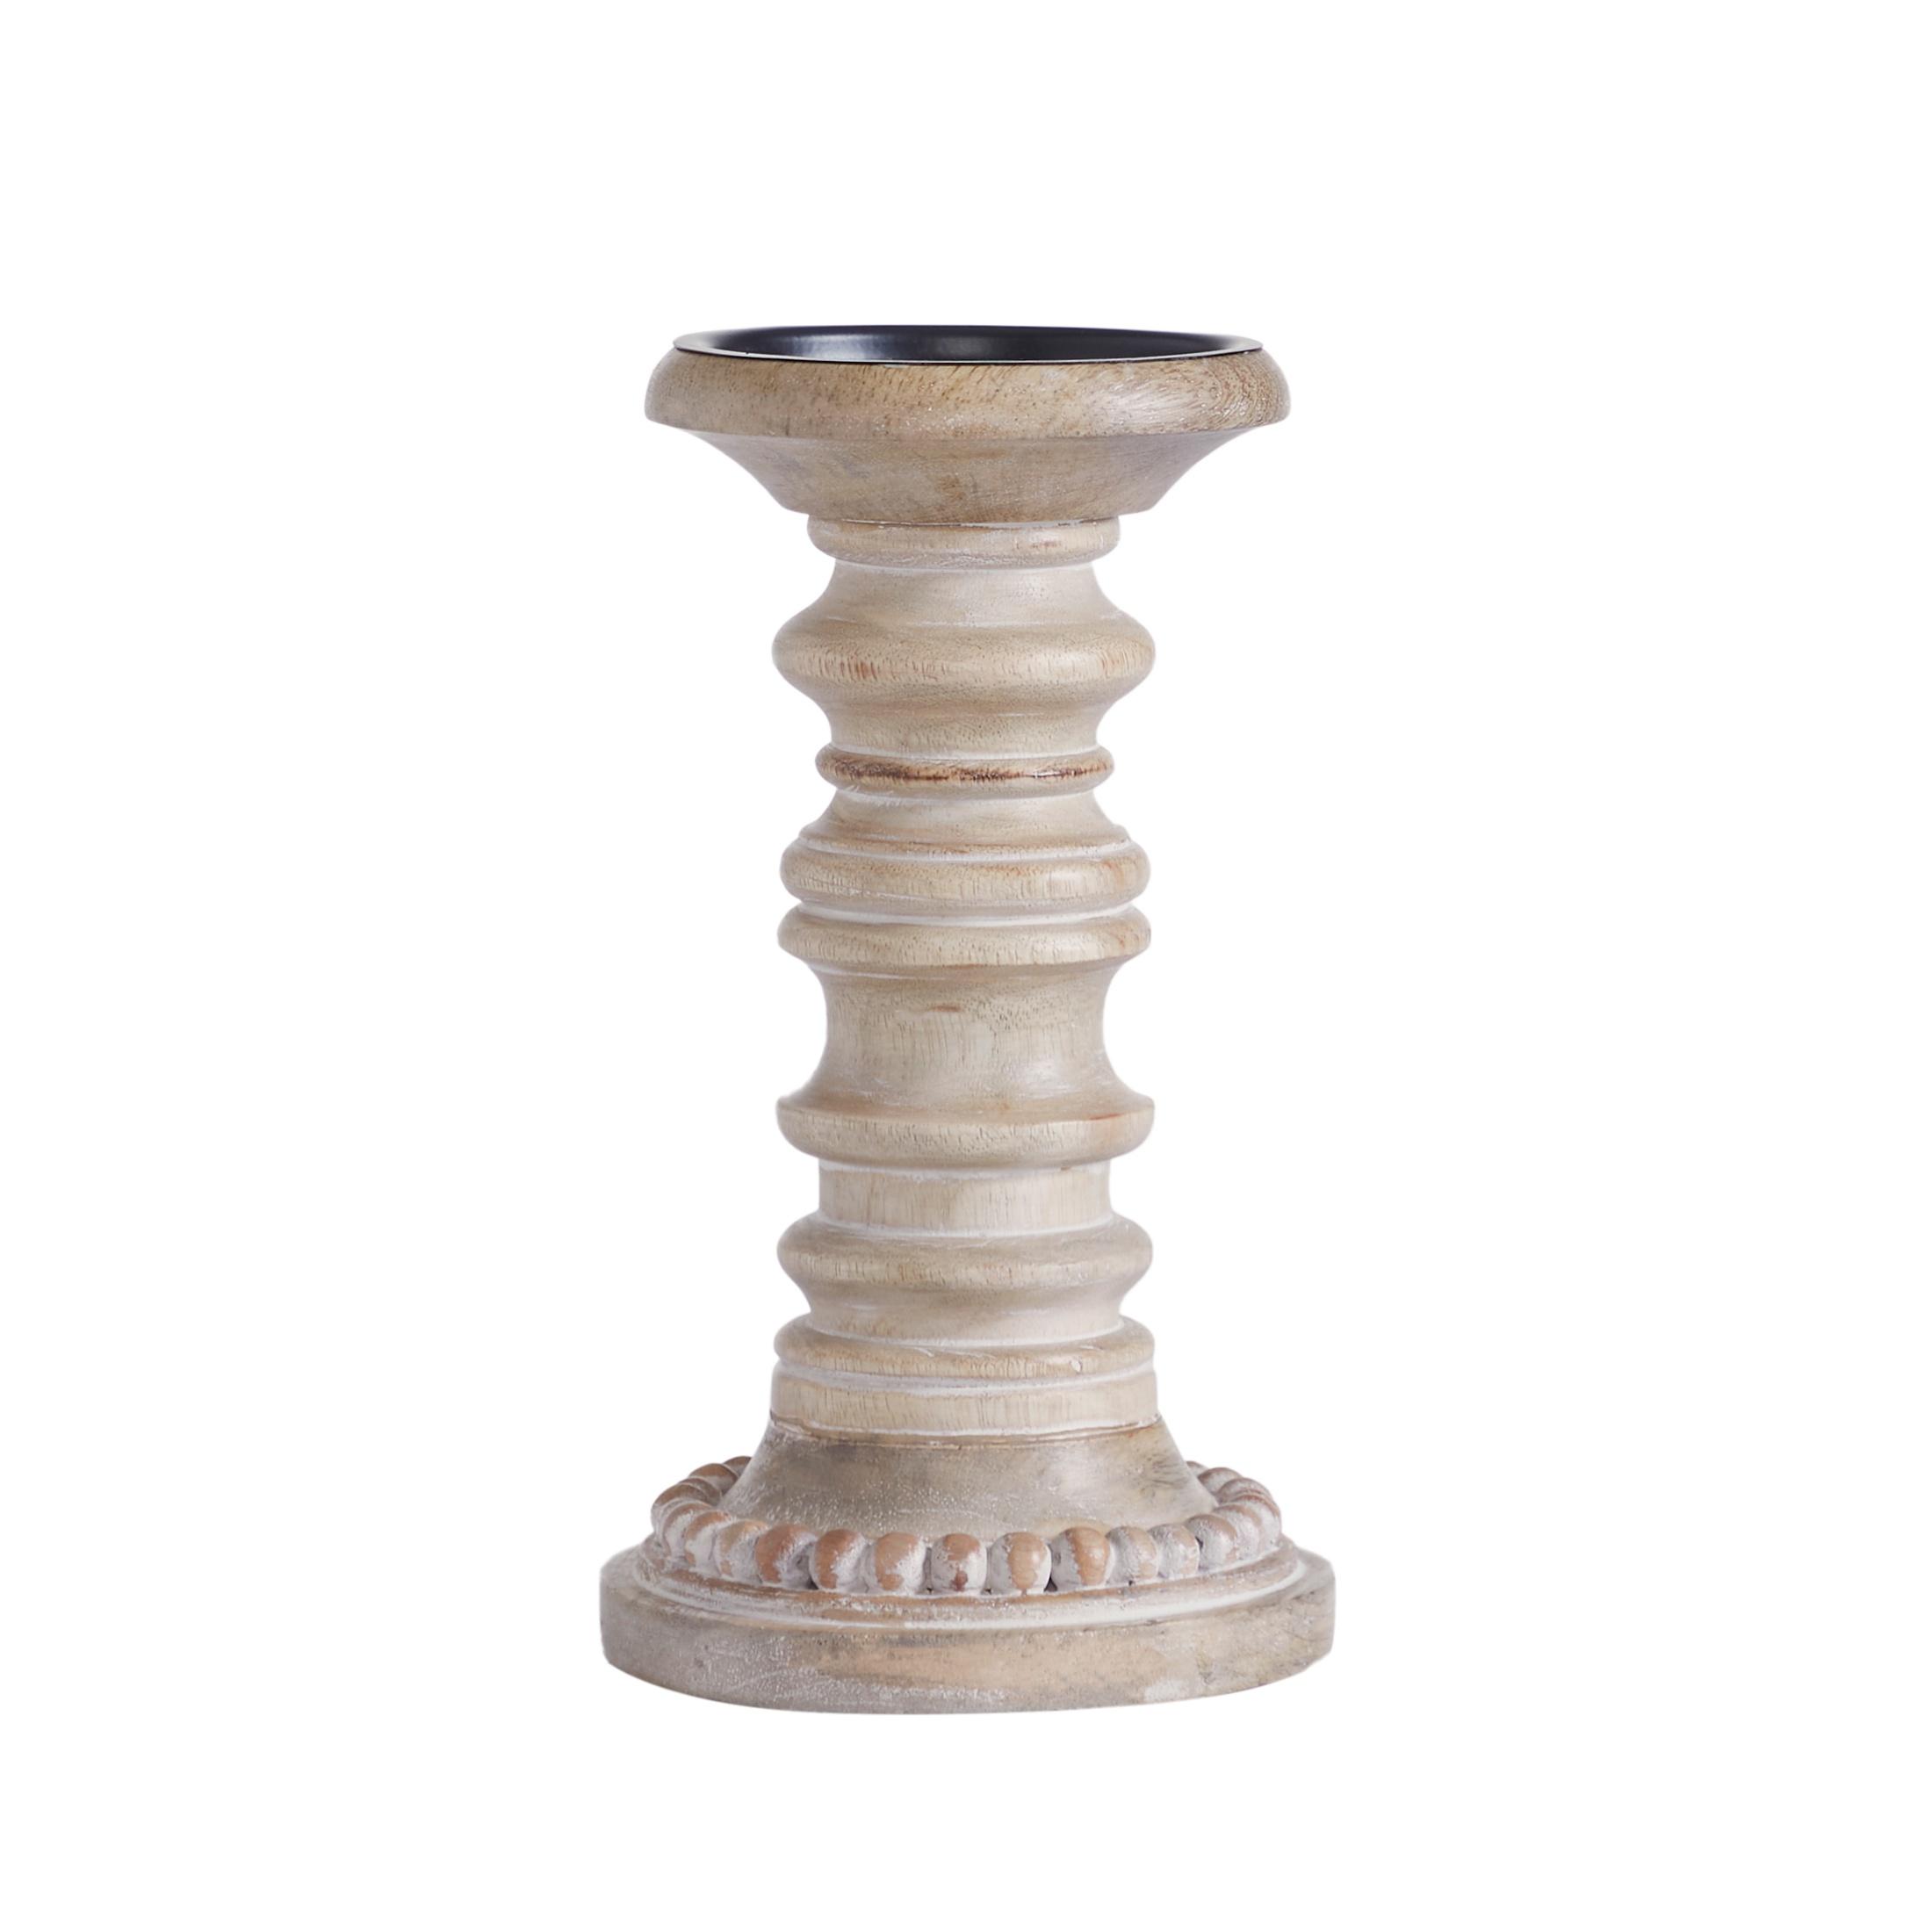 My Texas House Natural Mango Wood Pedestal Candle Holder, 8" Height - image 3 of 5